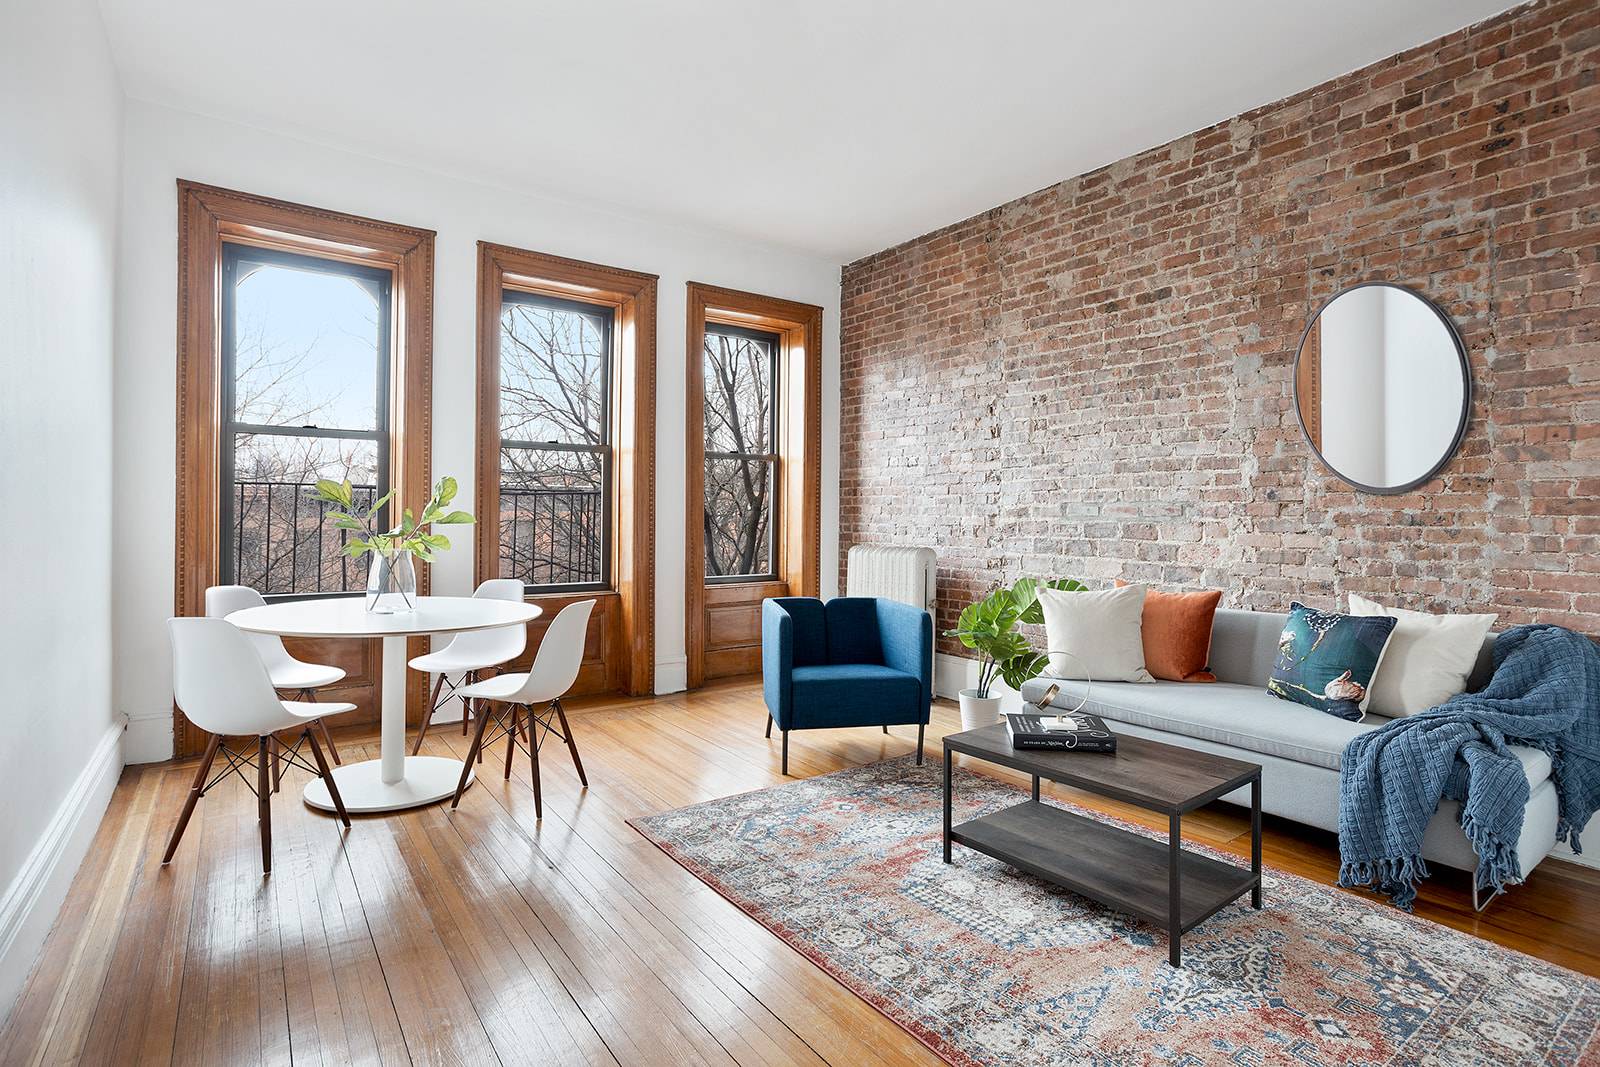 This sunny one bedroom co op is located in a charming limestone building on the coveted block of 3rd Street in Park Slope.